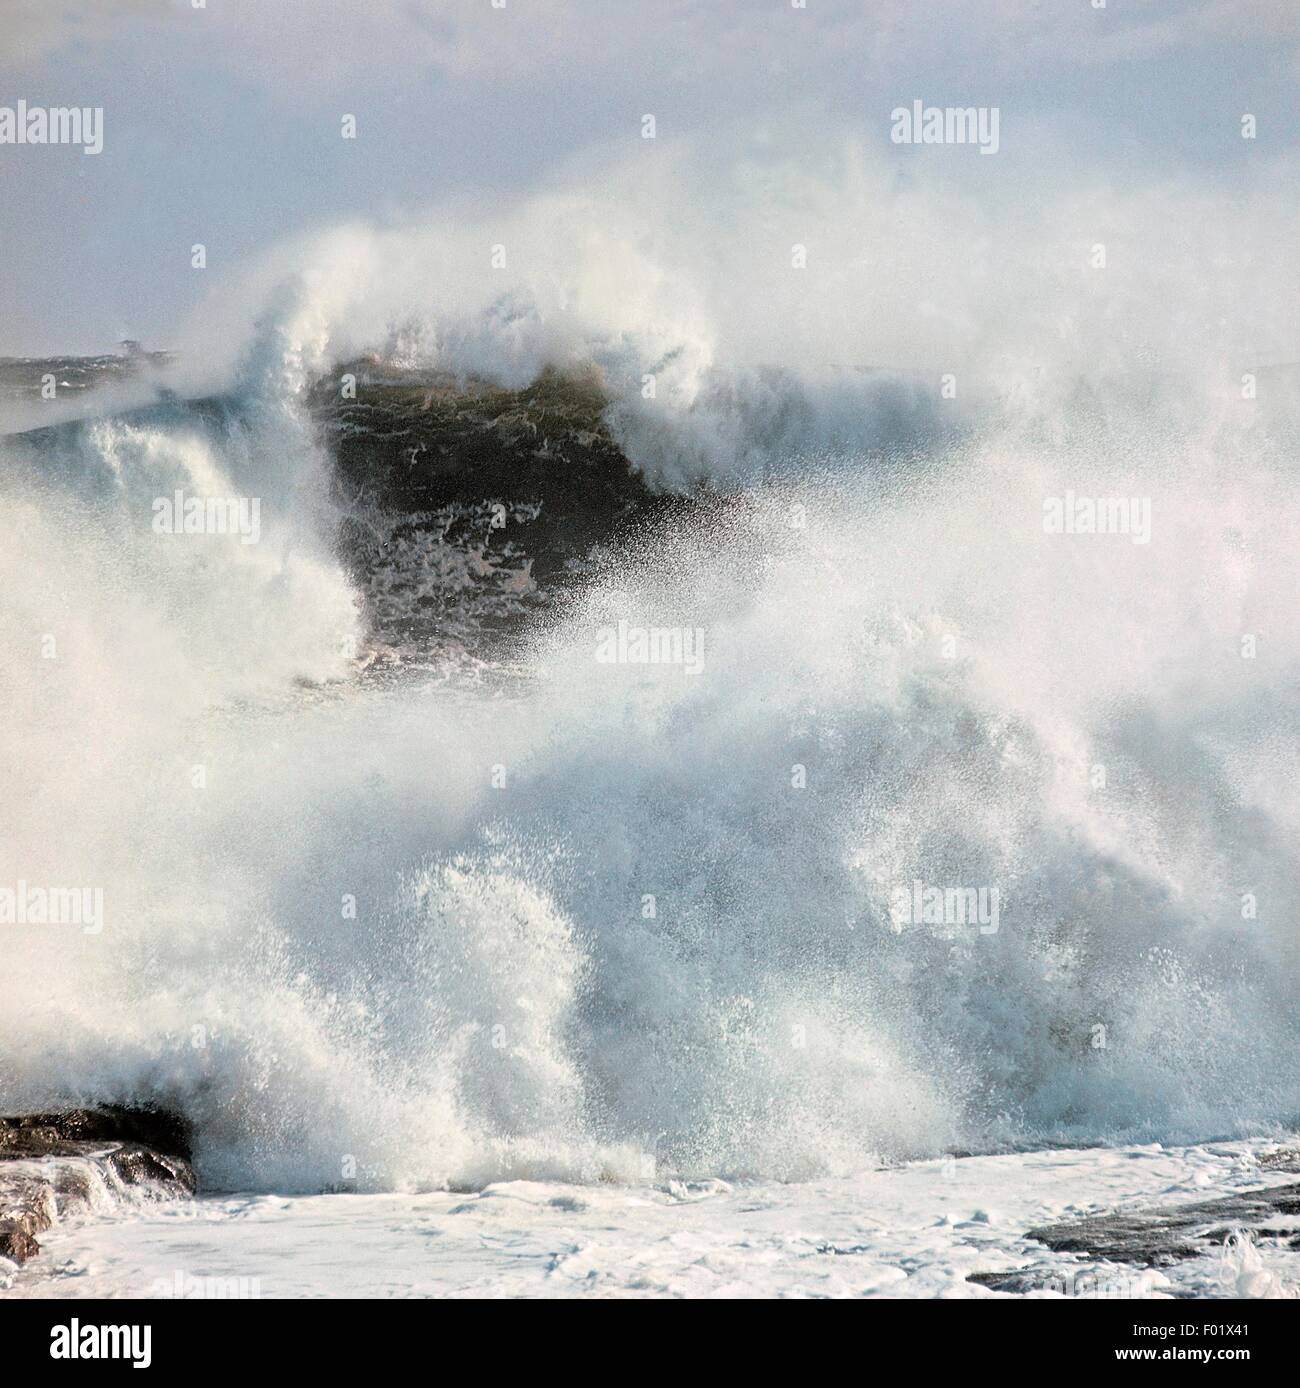 A wave breaking on the shore during rough seas. Stock Photo